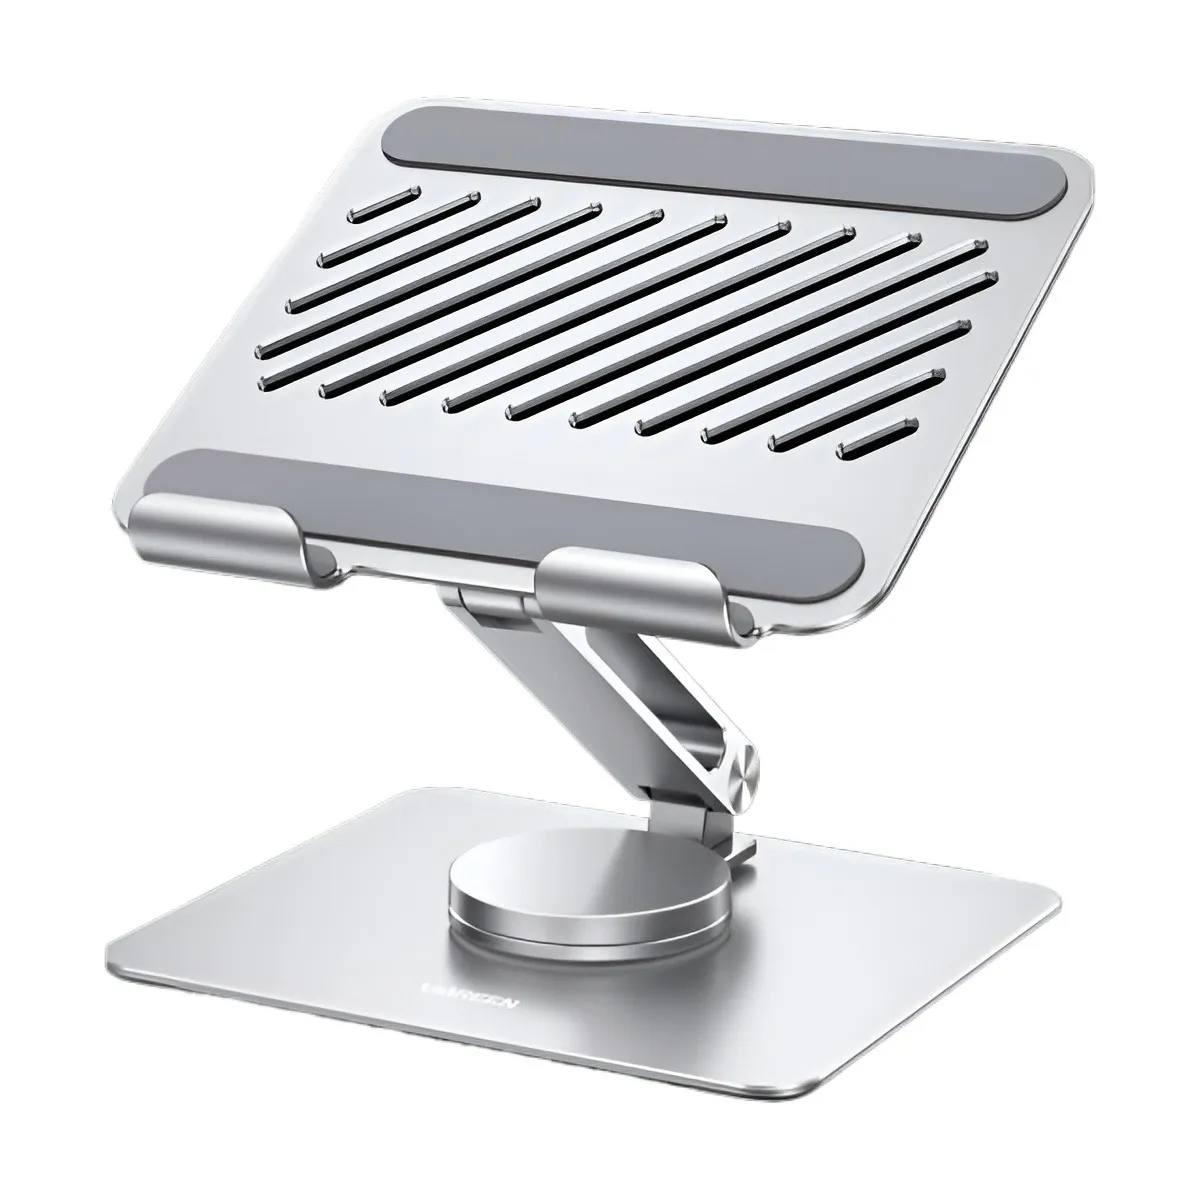 Laptop Stand Almunium Alloy Rotating Bracket, With 360 Degree Rotating